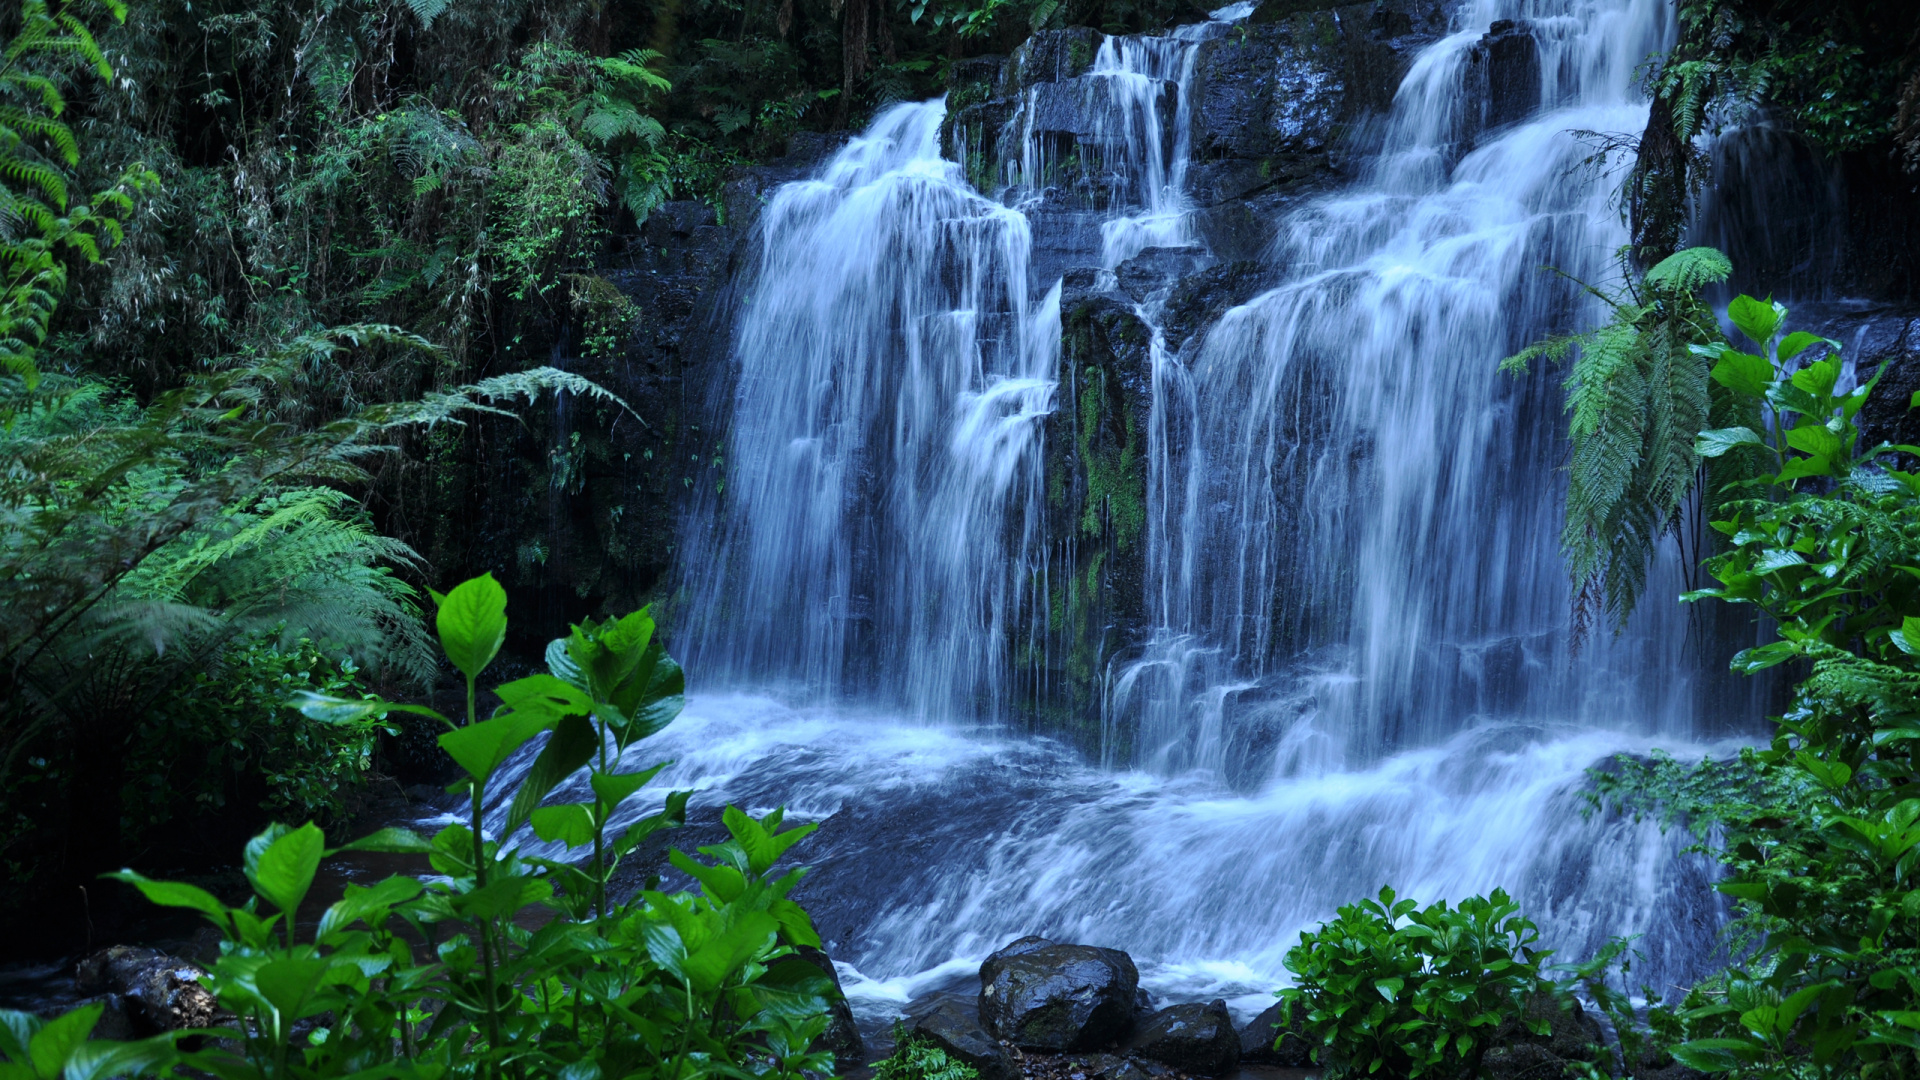 Water Falls in The Middle of Green Moss Covered Rocks. Wallpaper in 1920x1080 Resolution